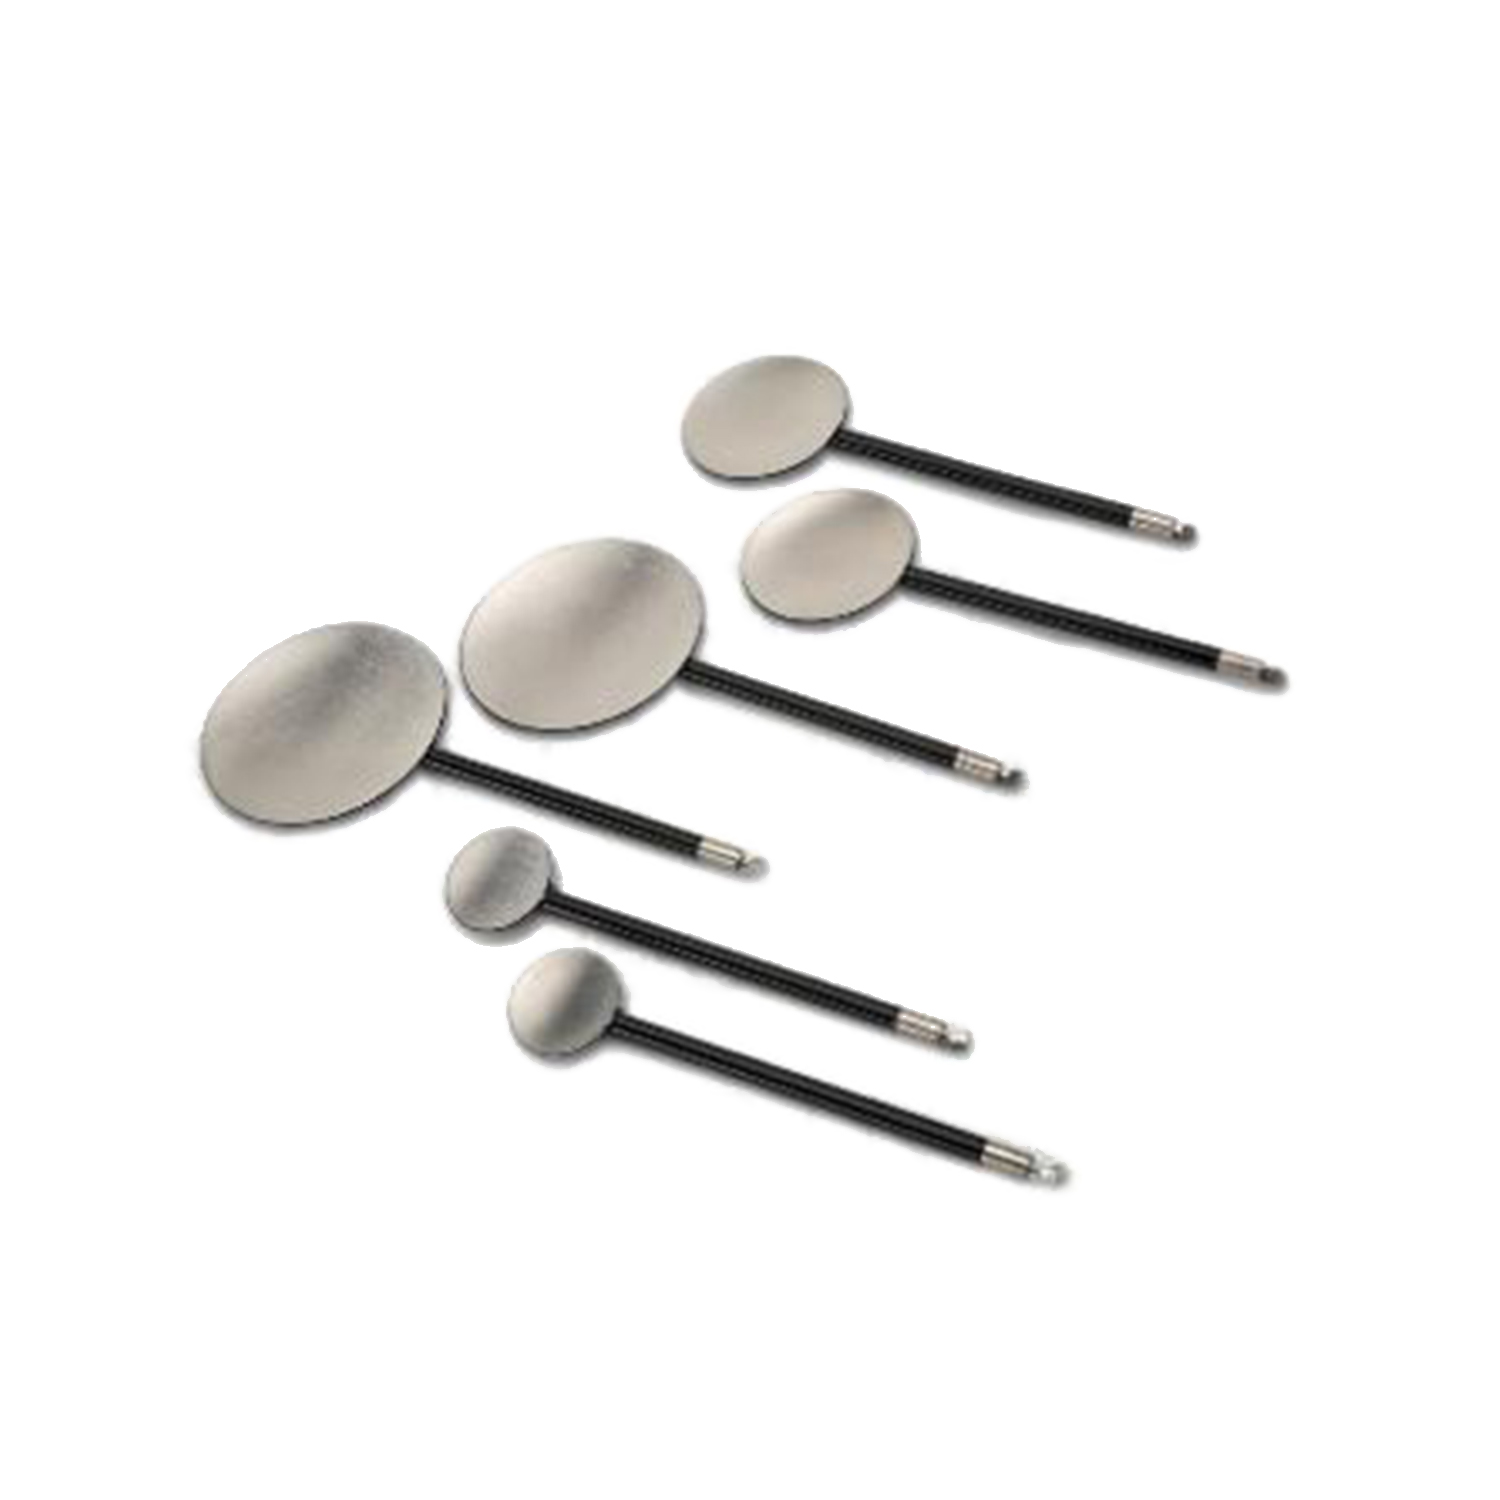 Physio-Control Internal Paddle Spoons